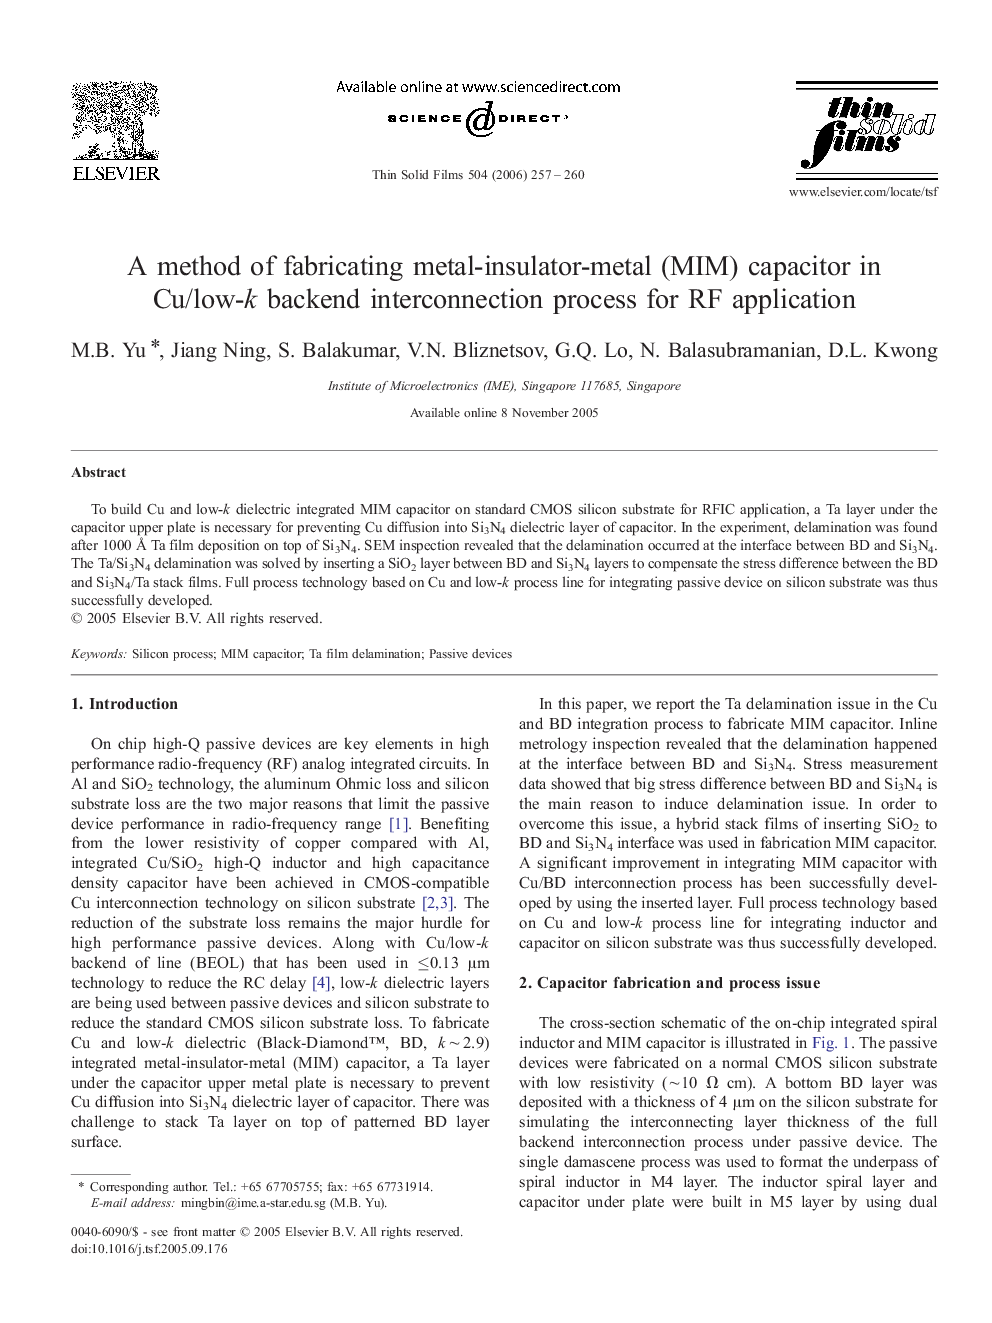 A method of fabricating metal-insulator-metal (MIM) capacitor in Cu/low-k backend interconnection process for RF application